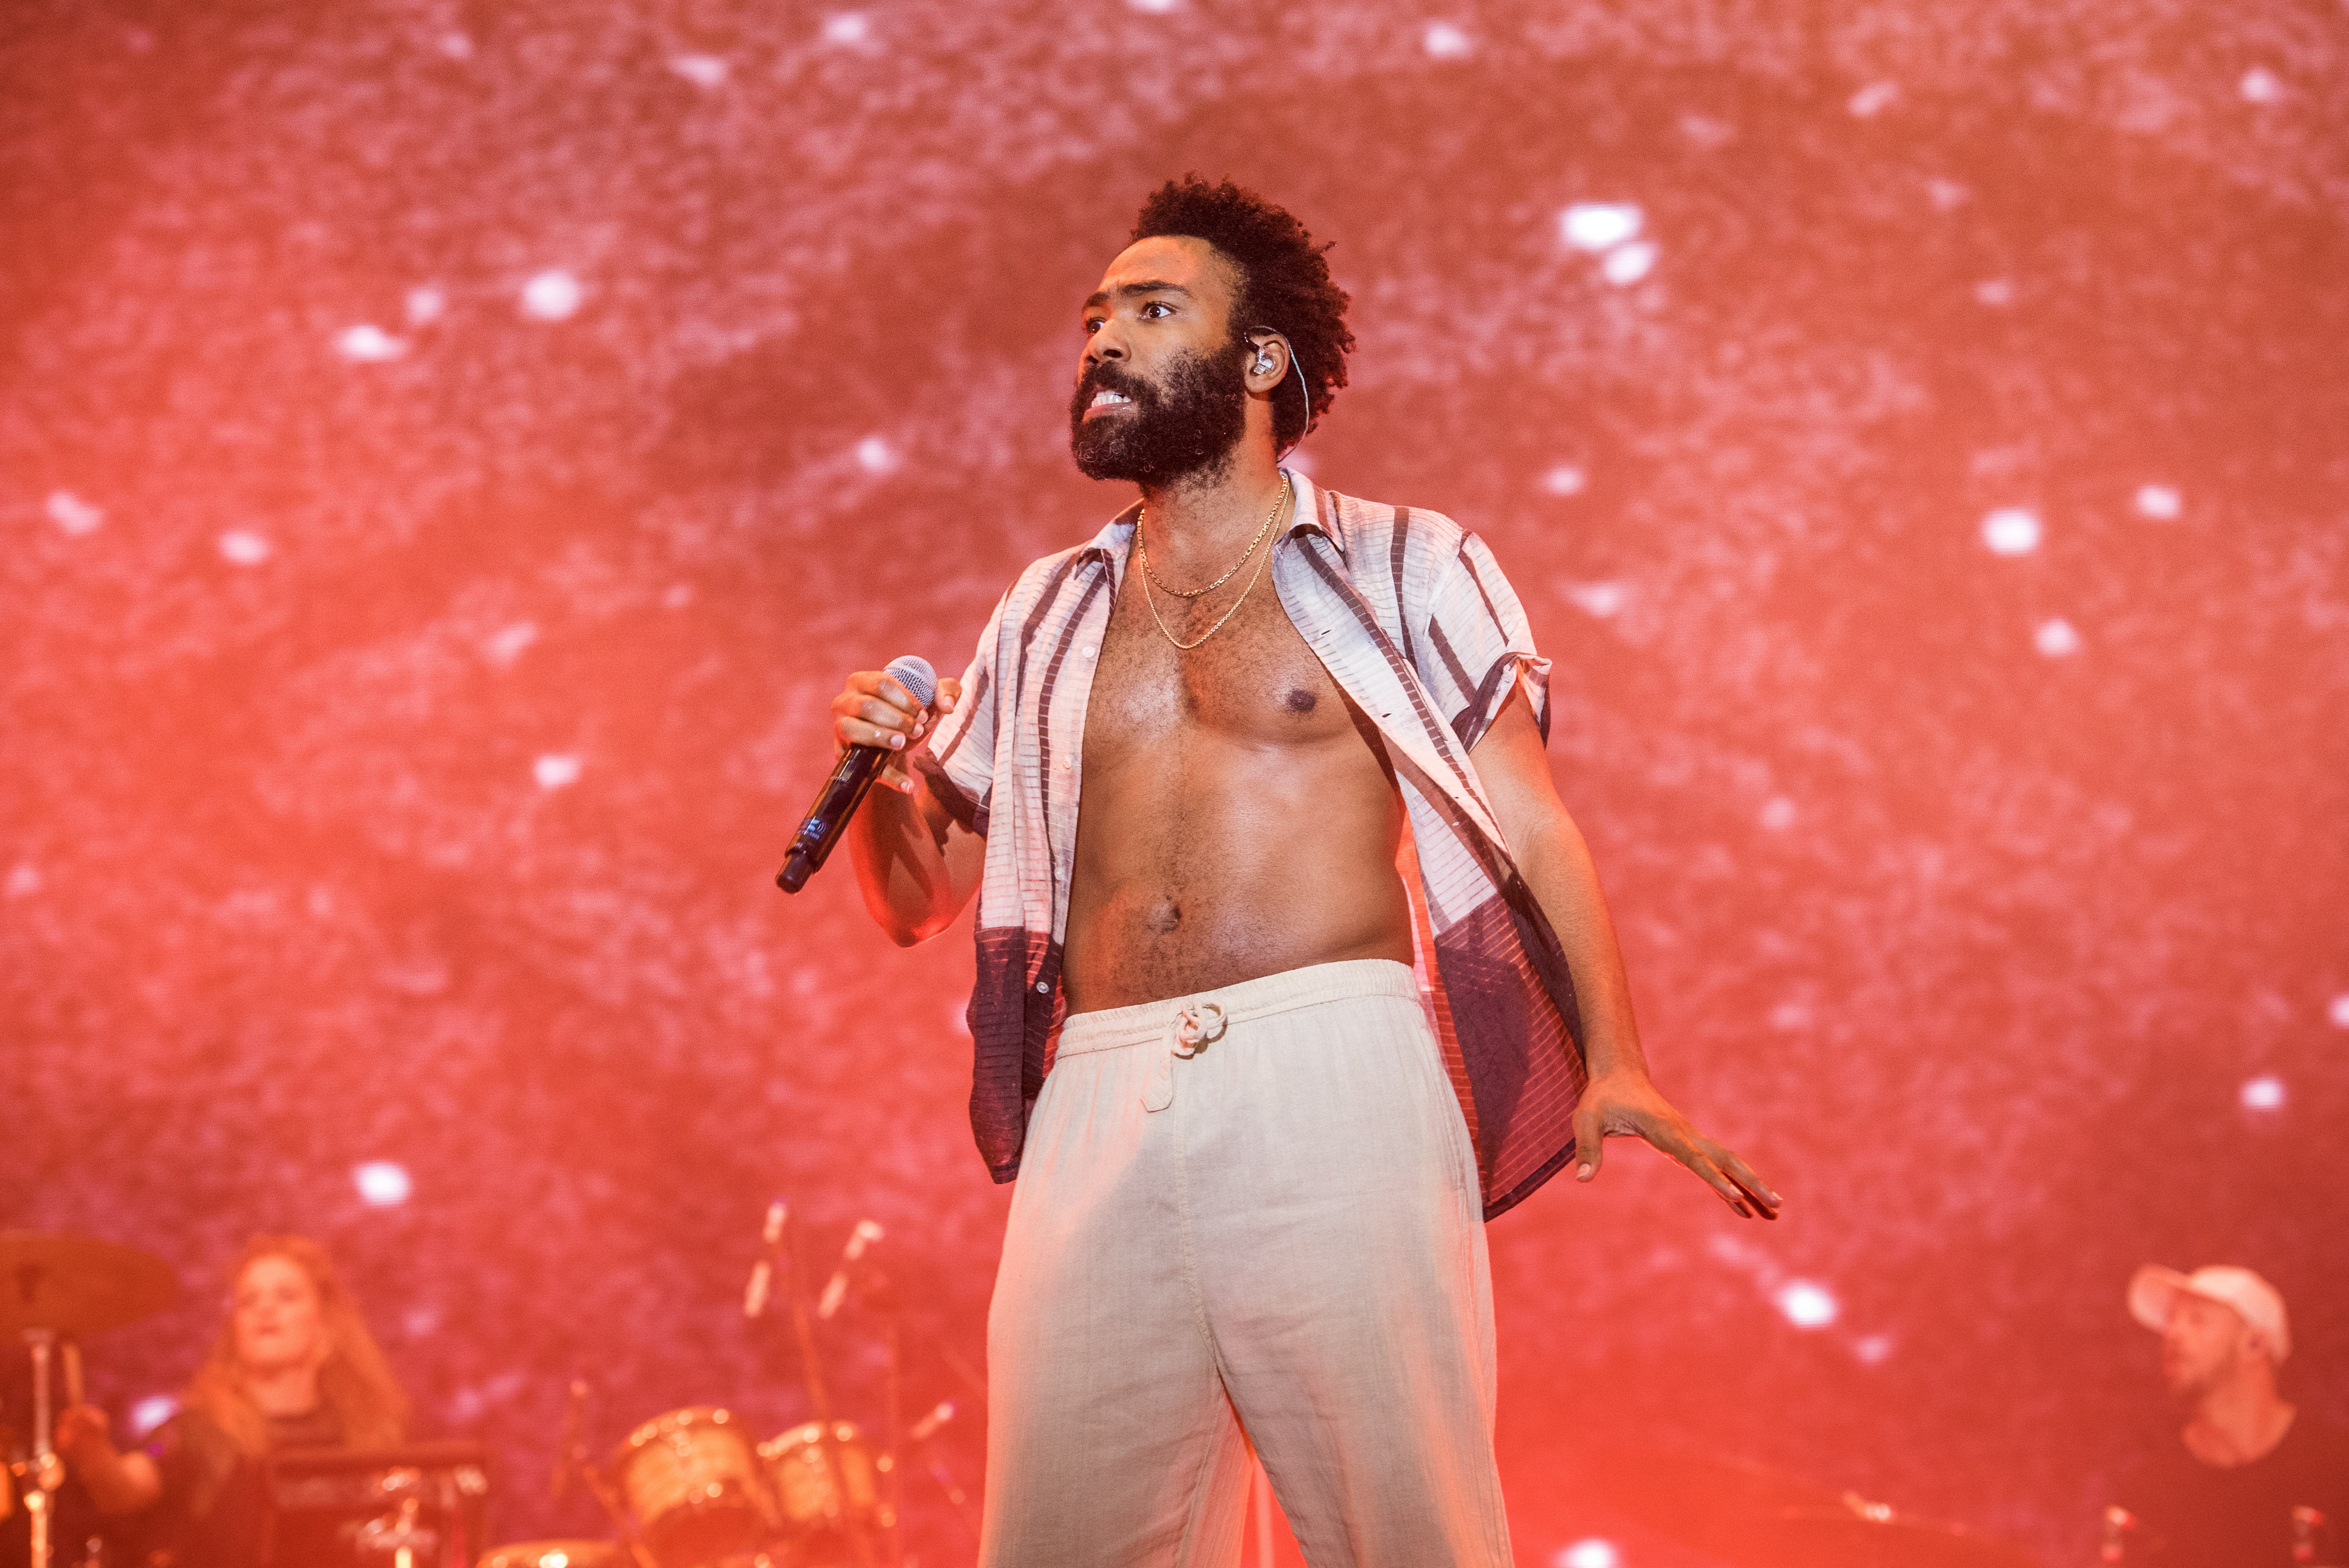 Childish Gambino’s ‘Feels Like Summer’ Video Has All The Celebrity Cameos You Want To See!